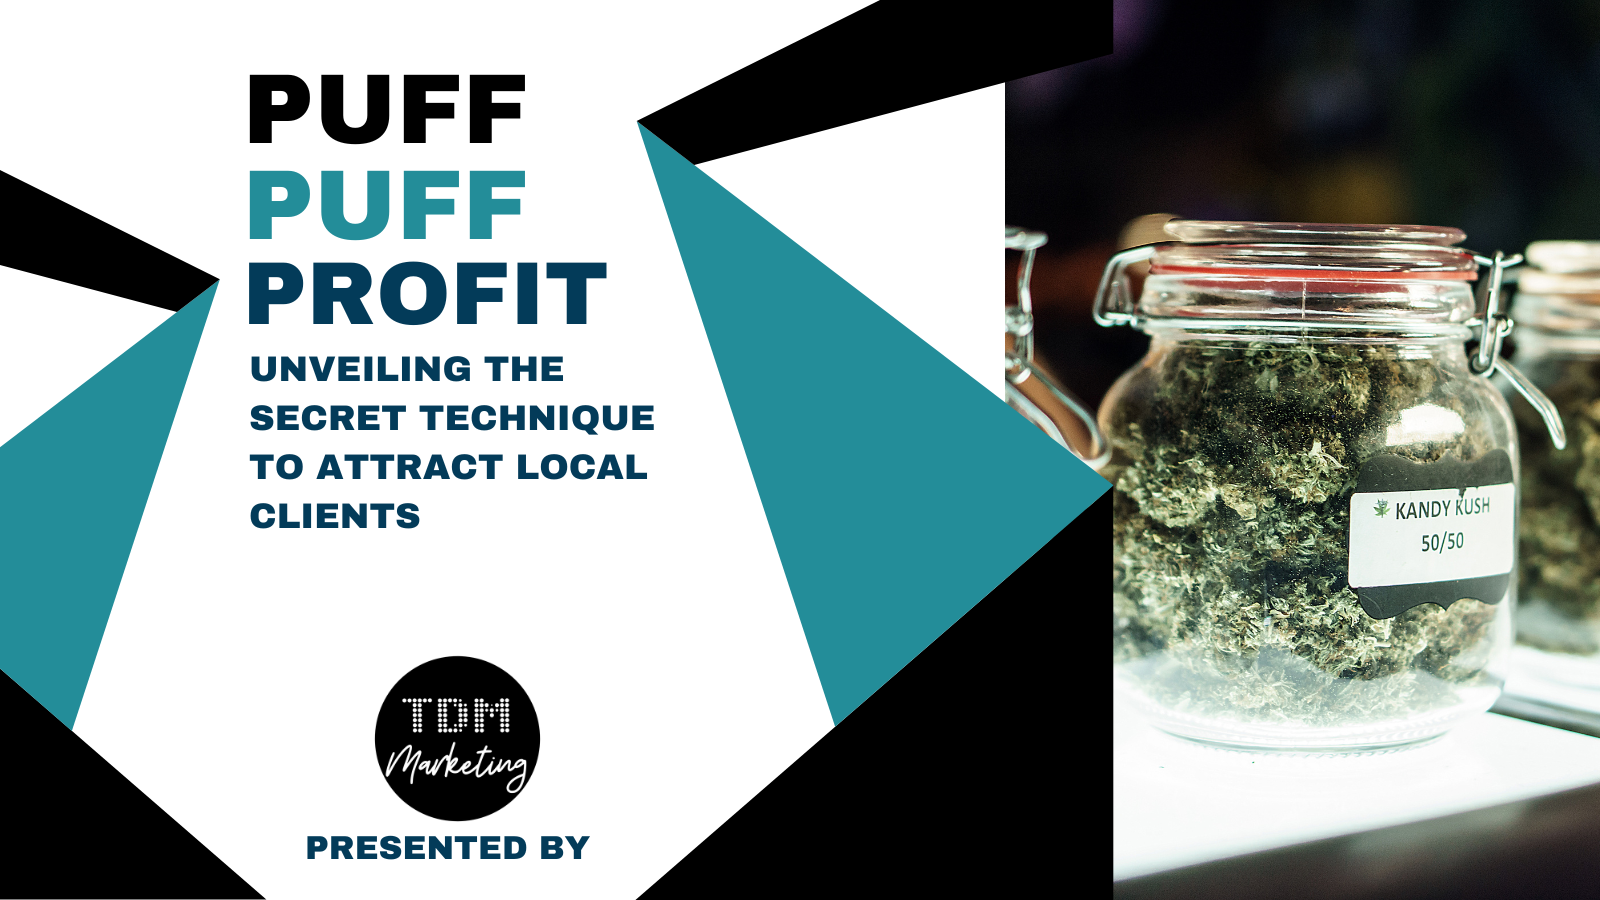 Puff, Puff, Profit: Attracting and Retaining Cannabis Customers
